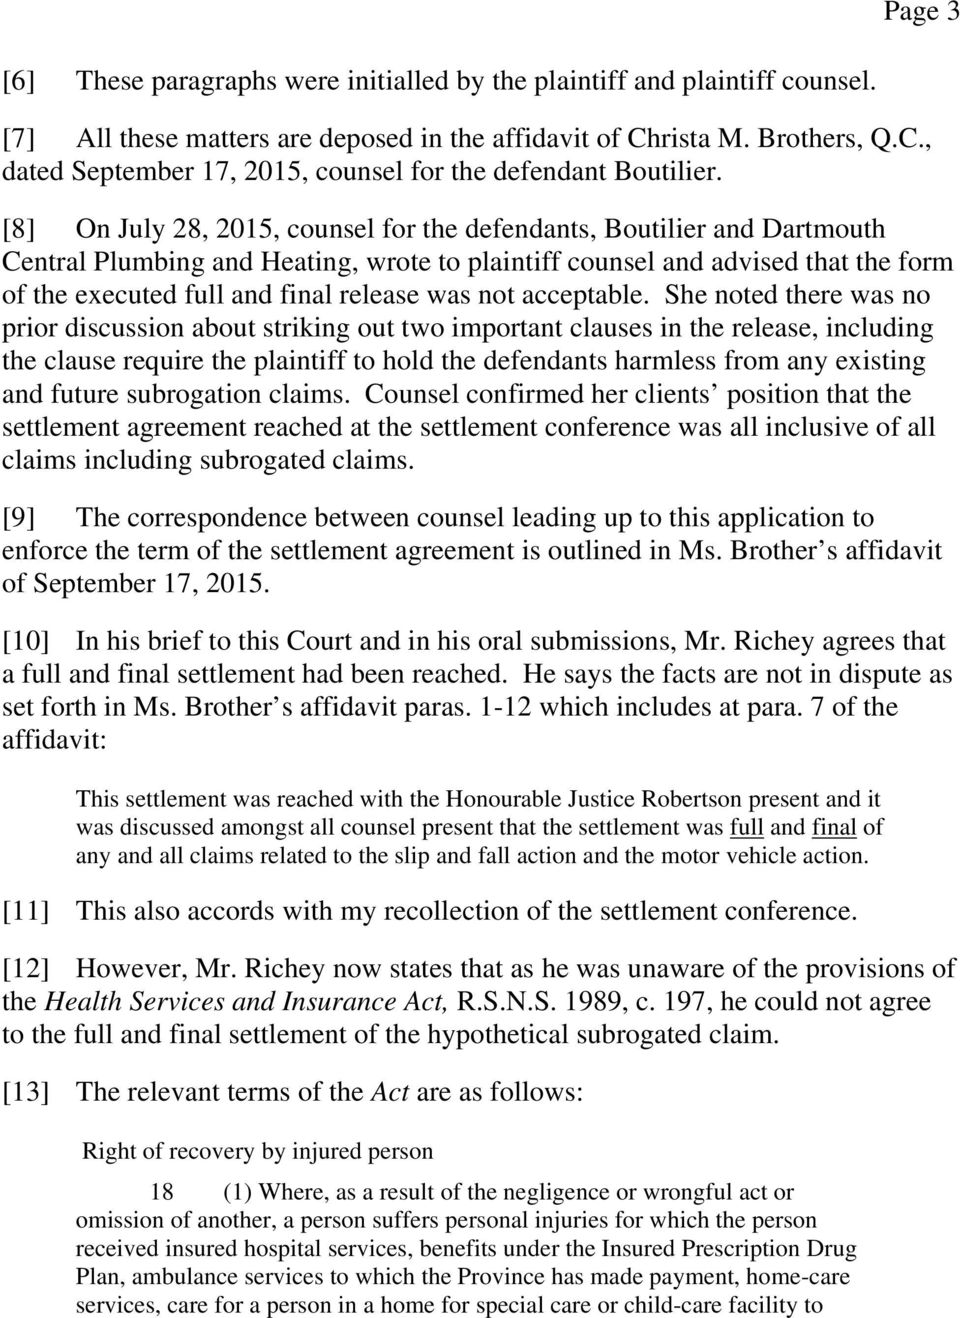 [8] On July 28, 2015, counsel for the defendants, Boutilier and Dartmouth Central Plumbing and Heating, wrote to plaintiff counsel and advised that the form of the executed full and final release was